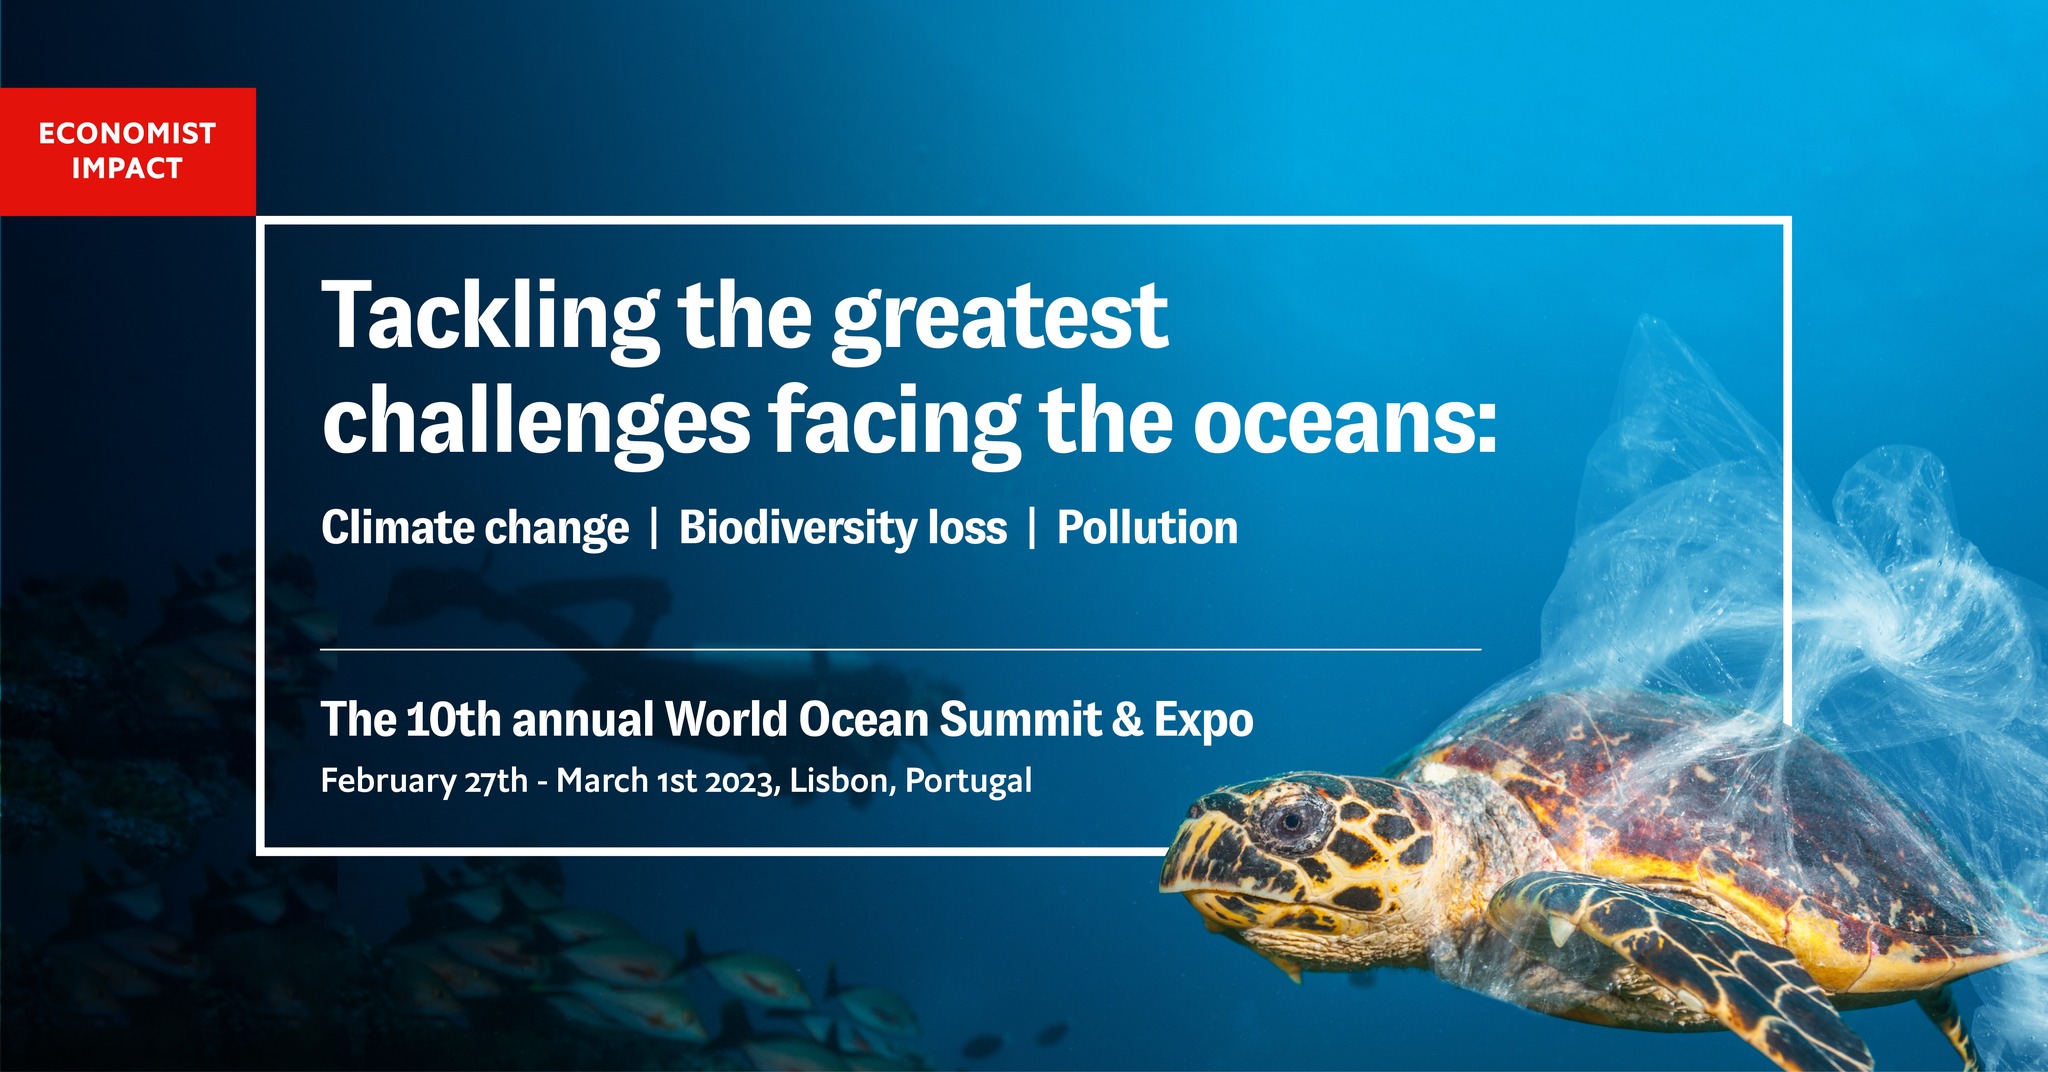 The 10th Ocean Summit will foster a global conversation on the greatest challenges facing the oceans